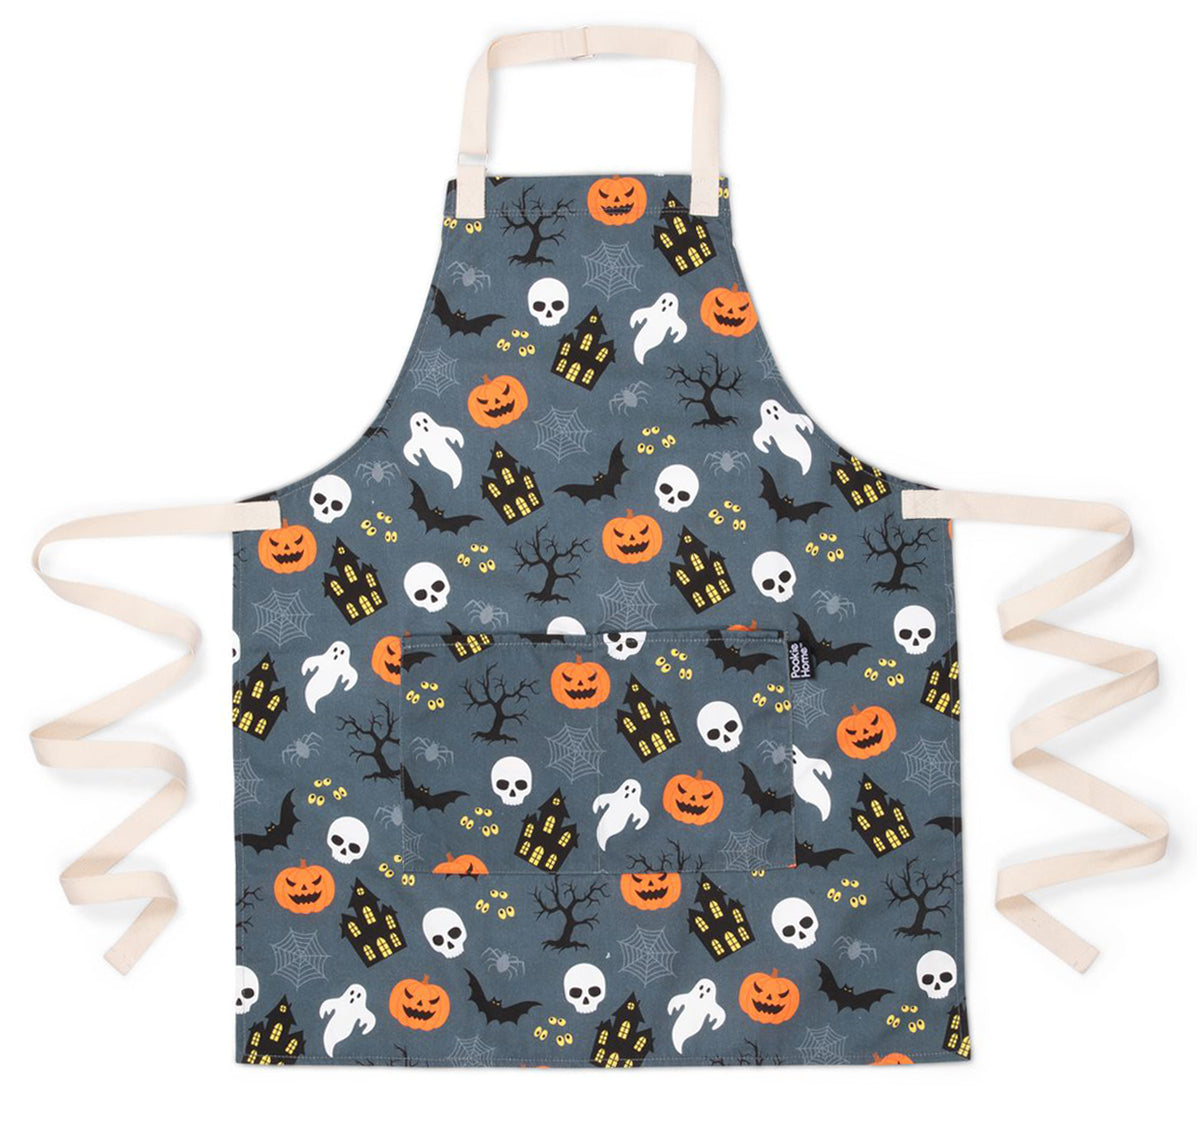 Pookie Home Spooky Halloween Apron - Full Coverage Polycotton Apron wi